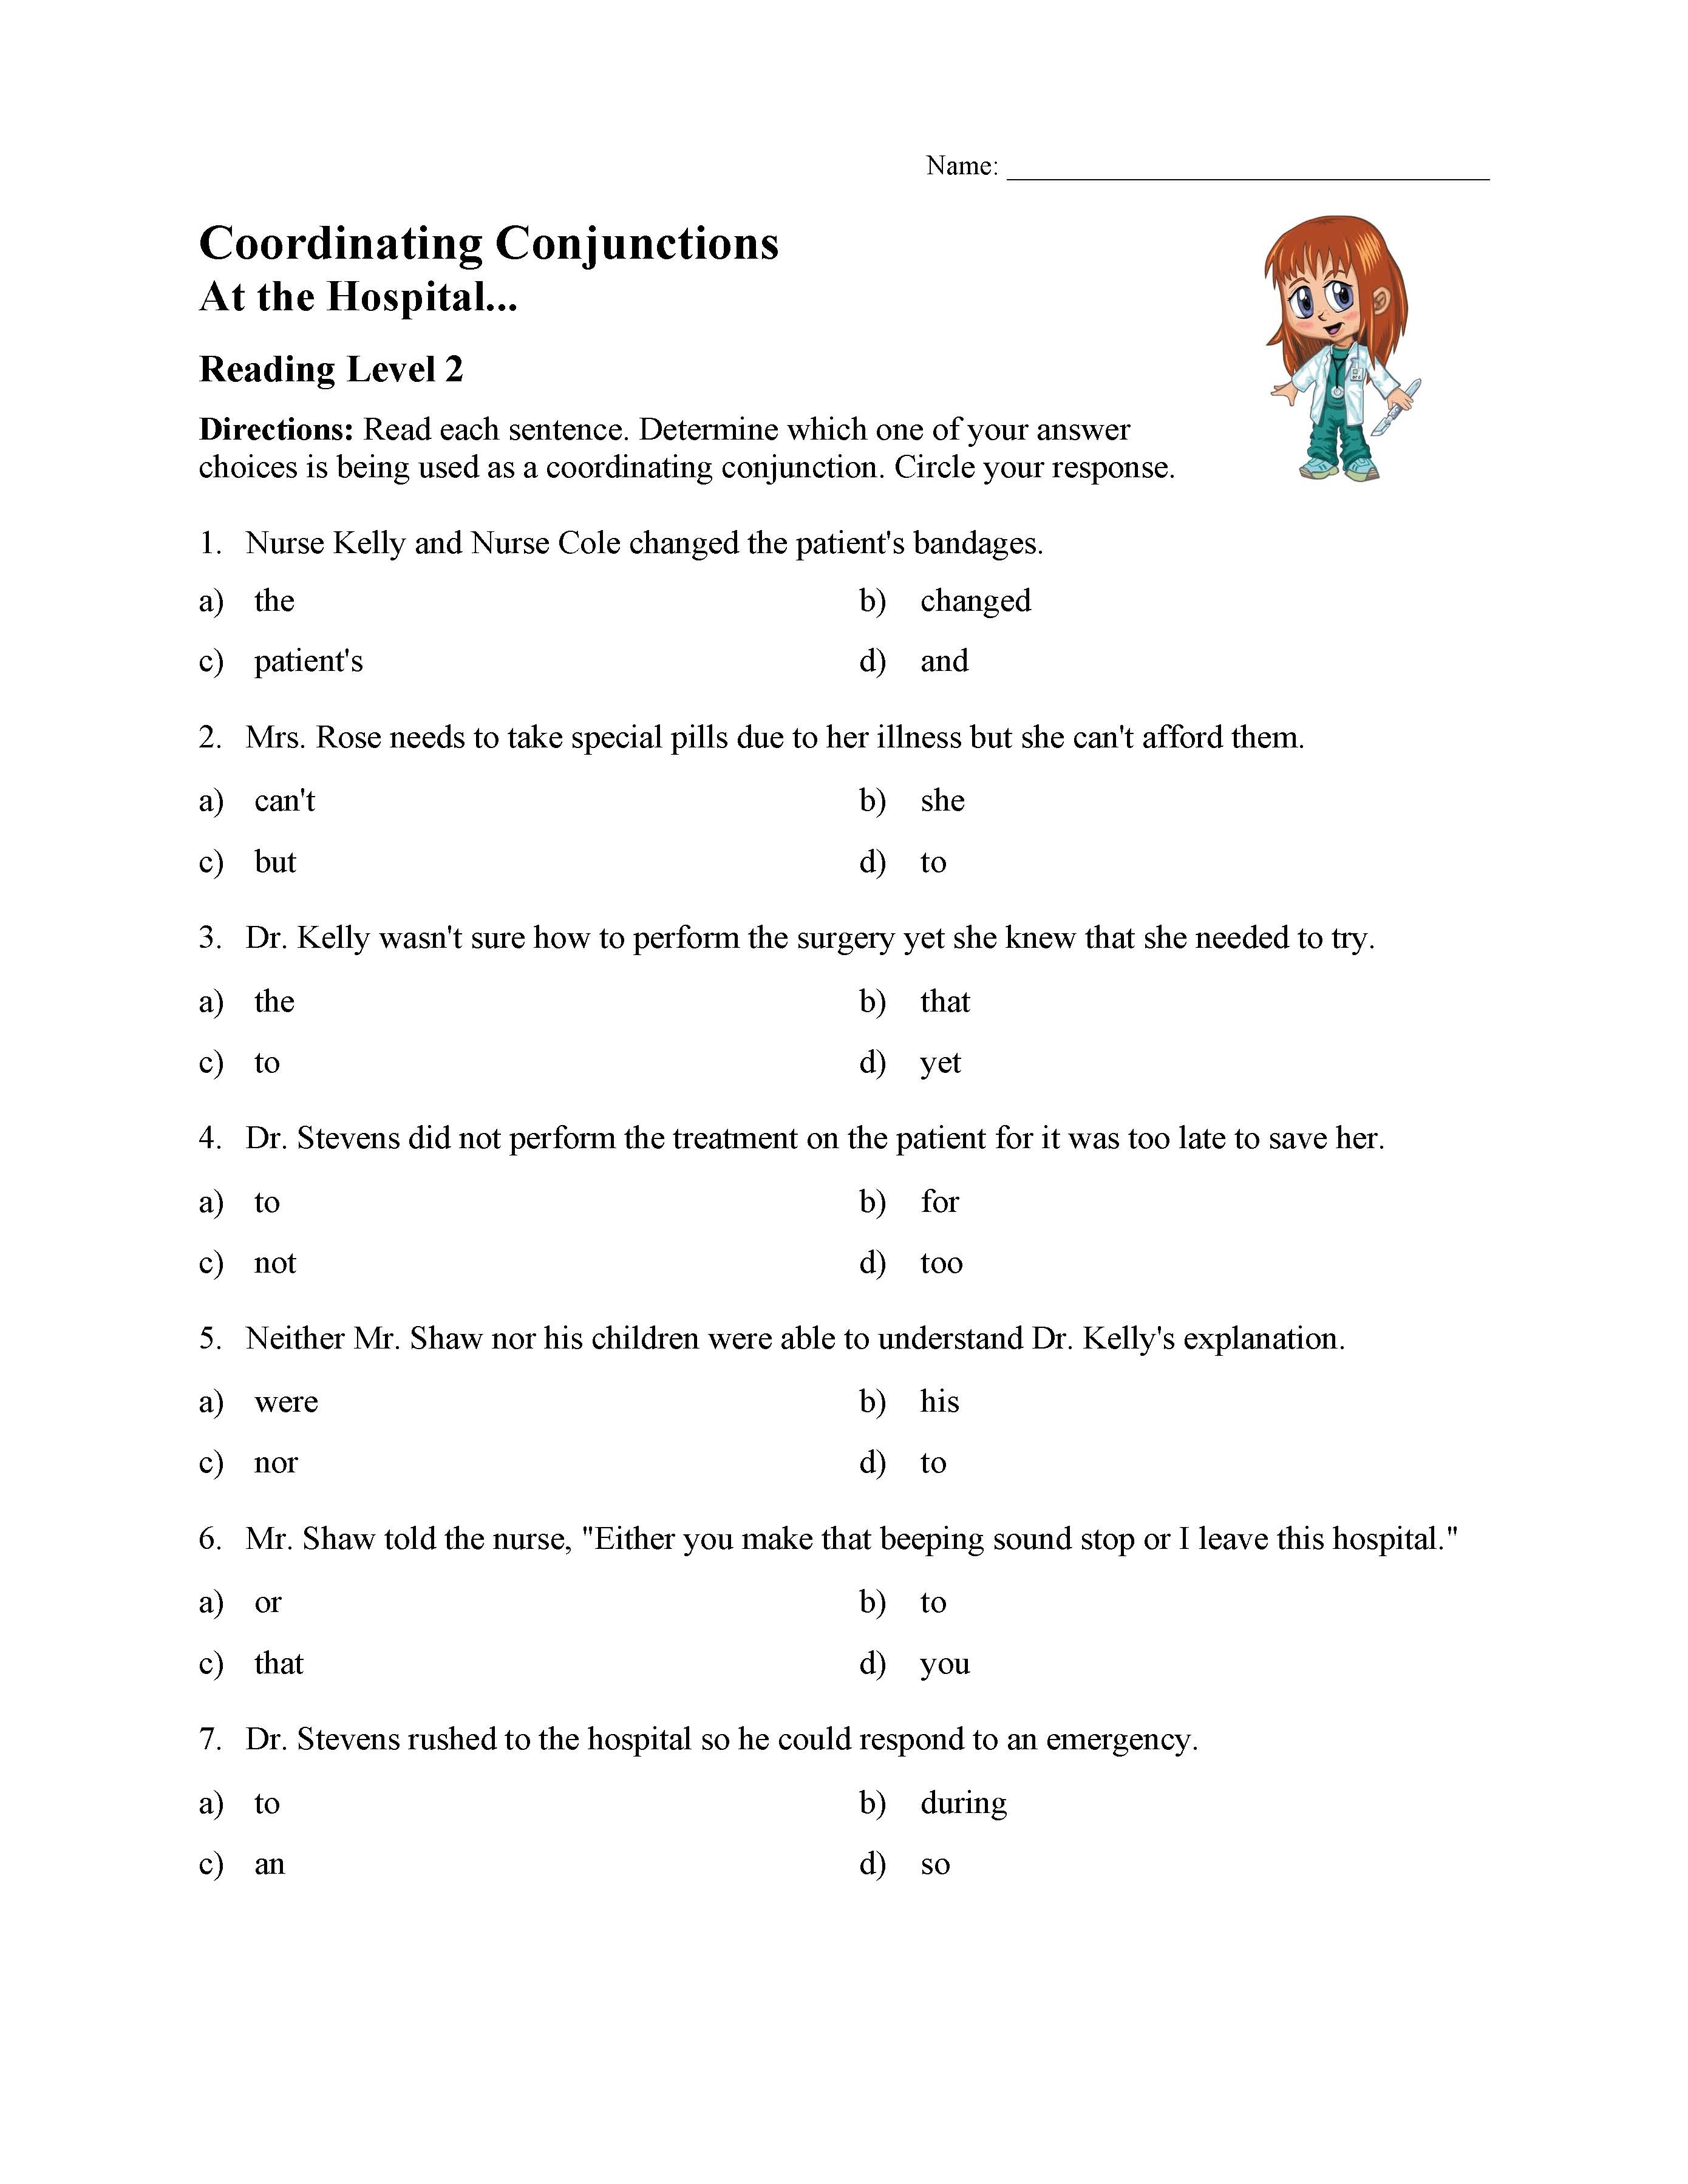 This is a preview image of the Coordinating Conjunctions Worksheet - Reading Level 2.